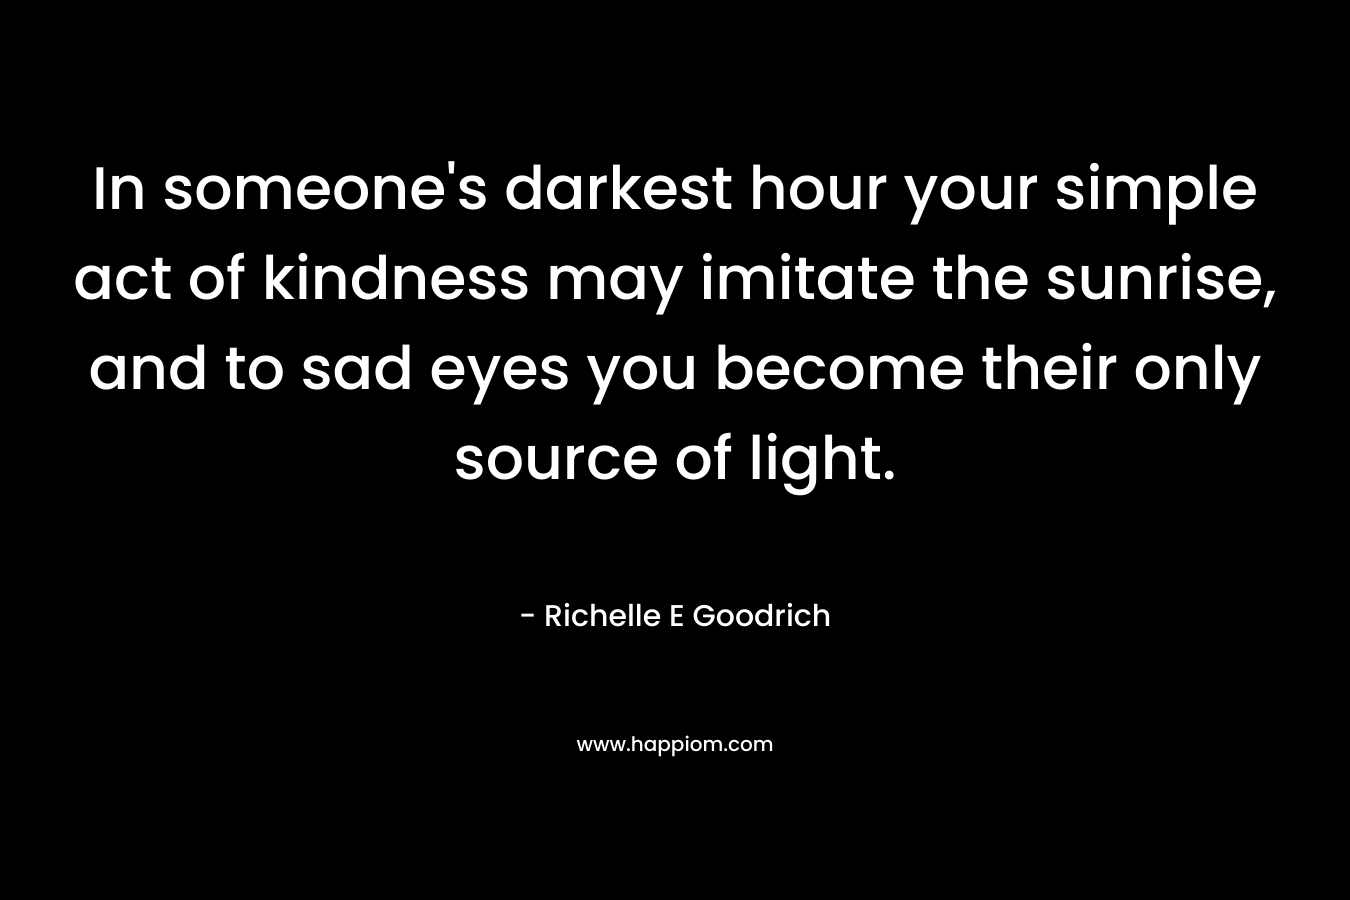 In someone’s darkest hour your simple act of kindness may imitate the sunrise, and to sad eyes you become their only source of light. – Richelle E Goodrich